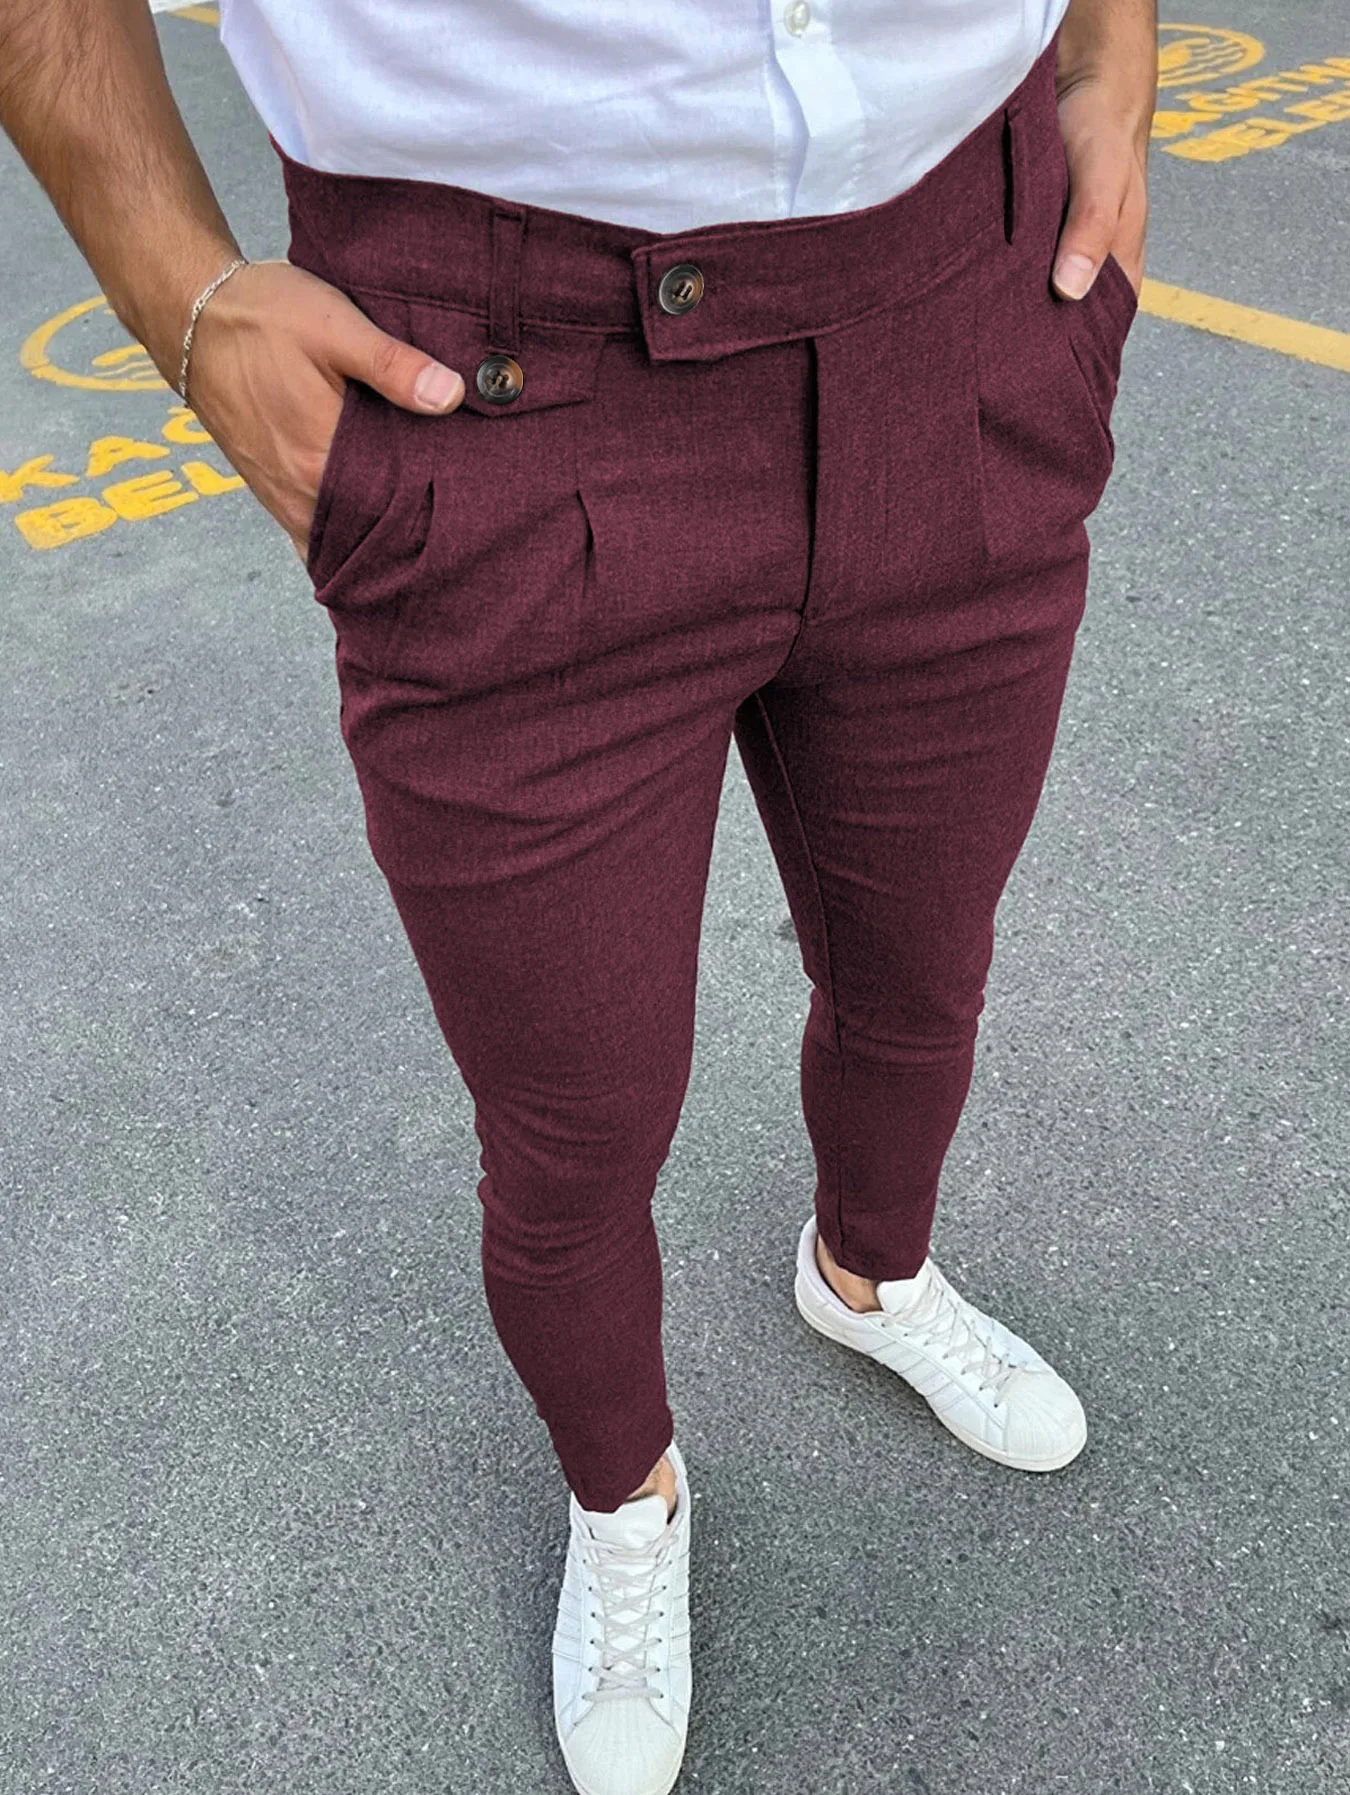 2023 New Men's Casual Pants Fashion Solid Business Leisure Trousers Trend Cool Street Wear Office Pencil Pants Calças Masculinas 1